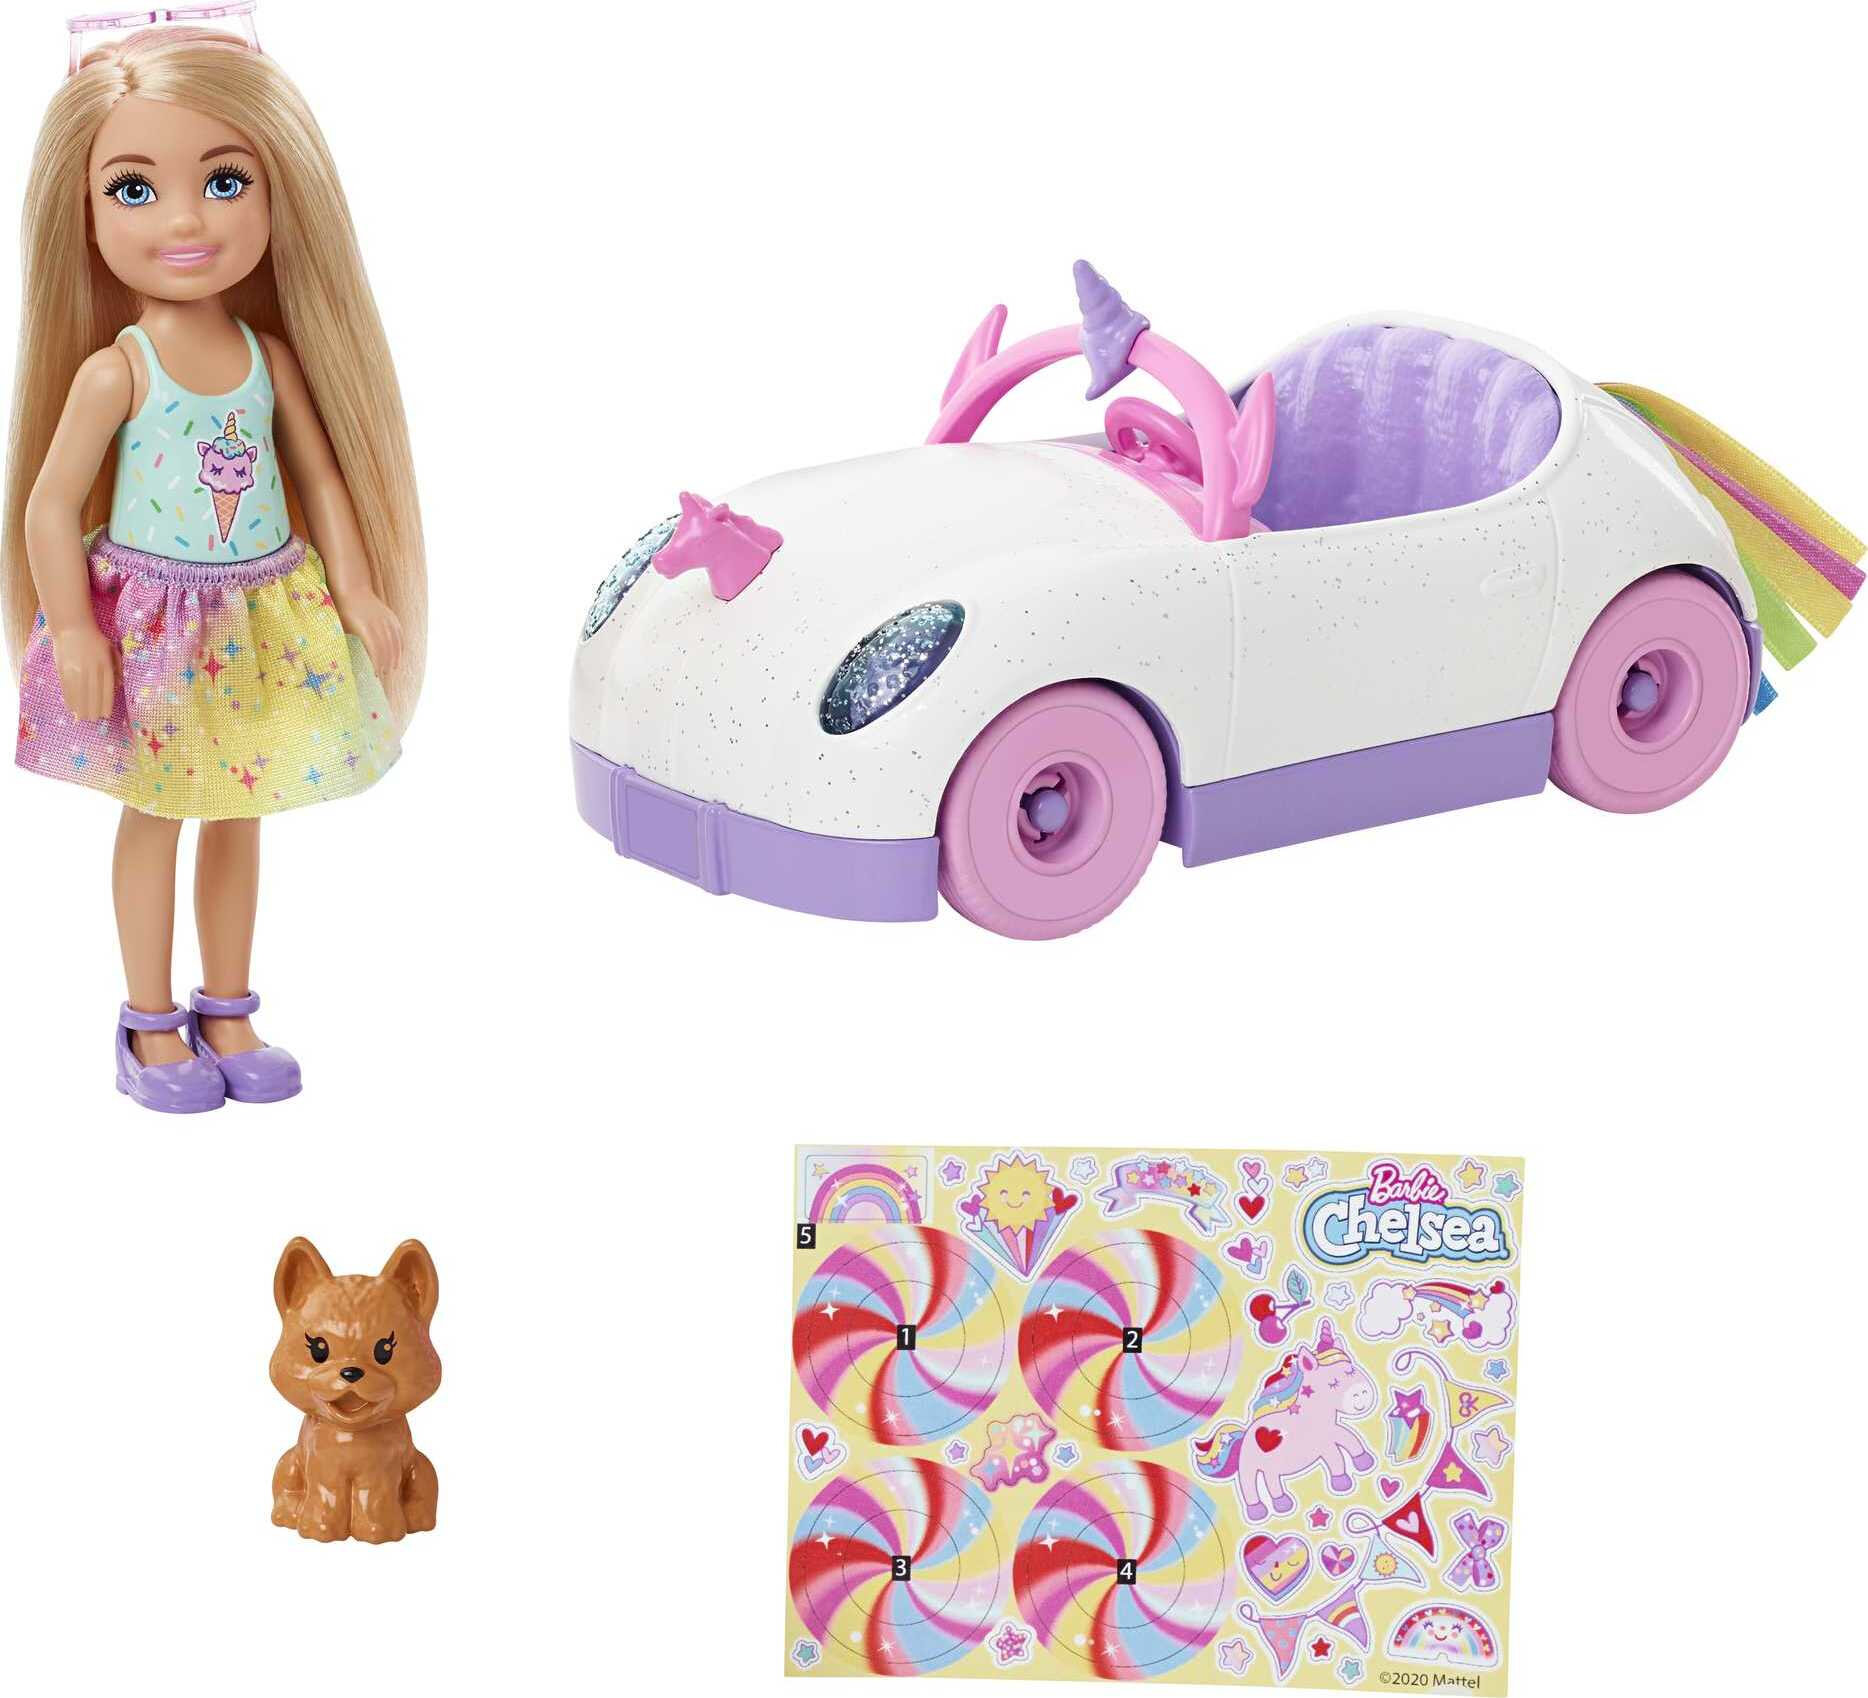 Barbie Club Chelsea Doll & Toy Car, Unicorn Theme, Blonde Small Doll, Puppy, Stickers & Accessories - image 1 of 6